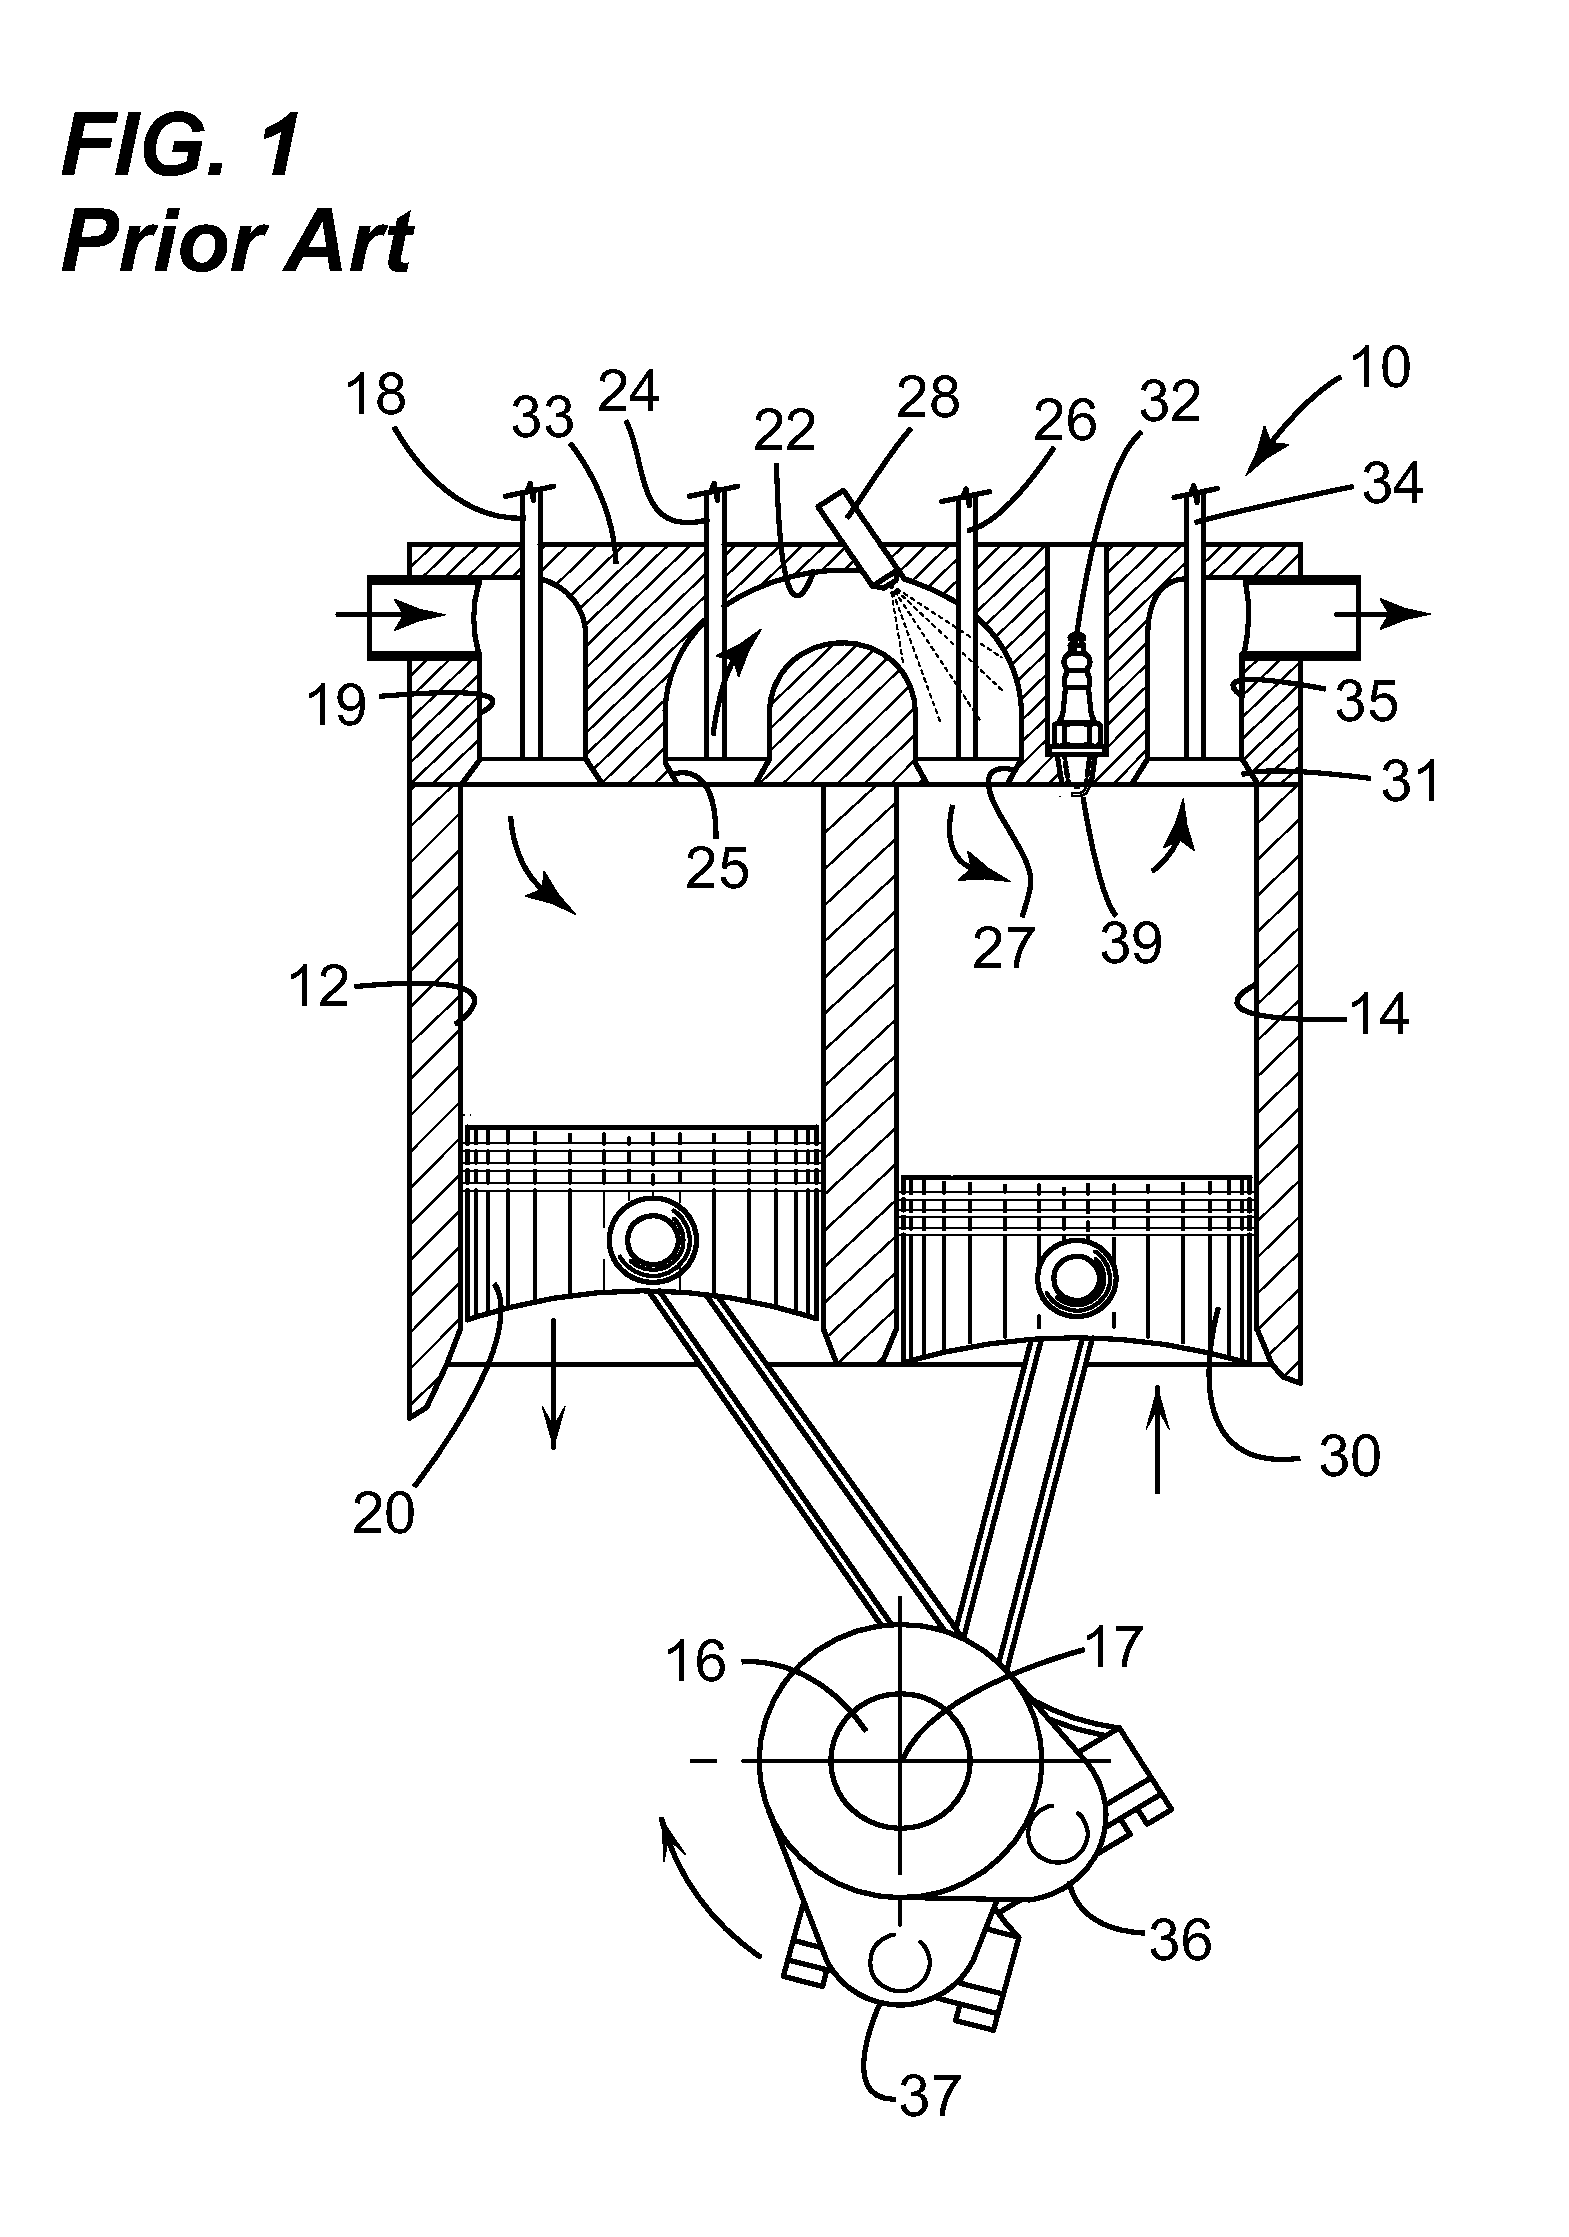 Turbocharged downsized compression cylinder for a split-cycle engine